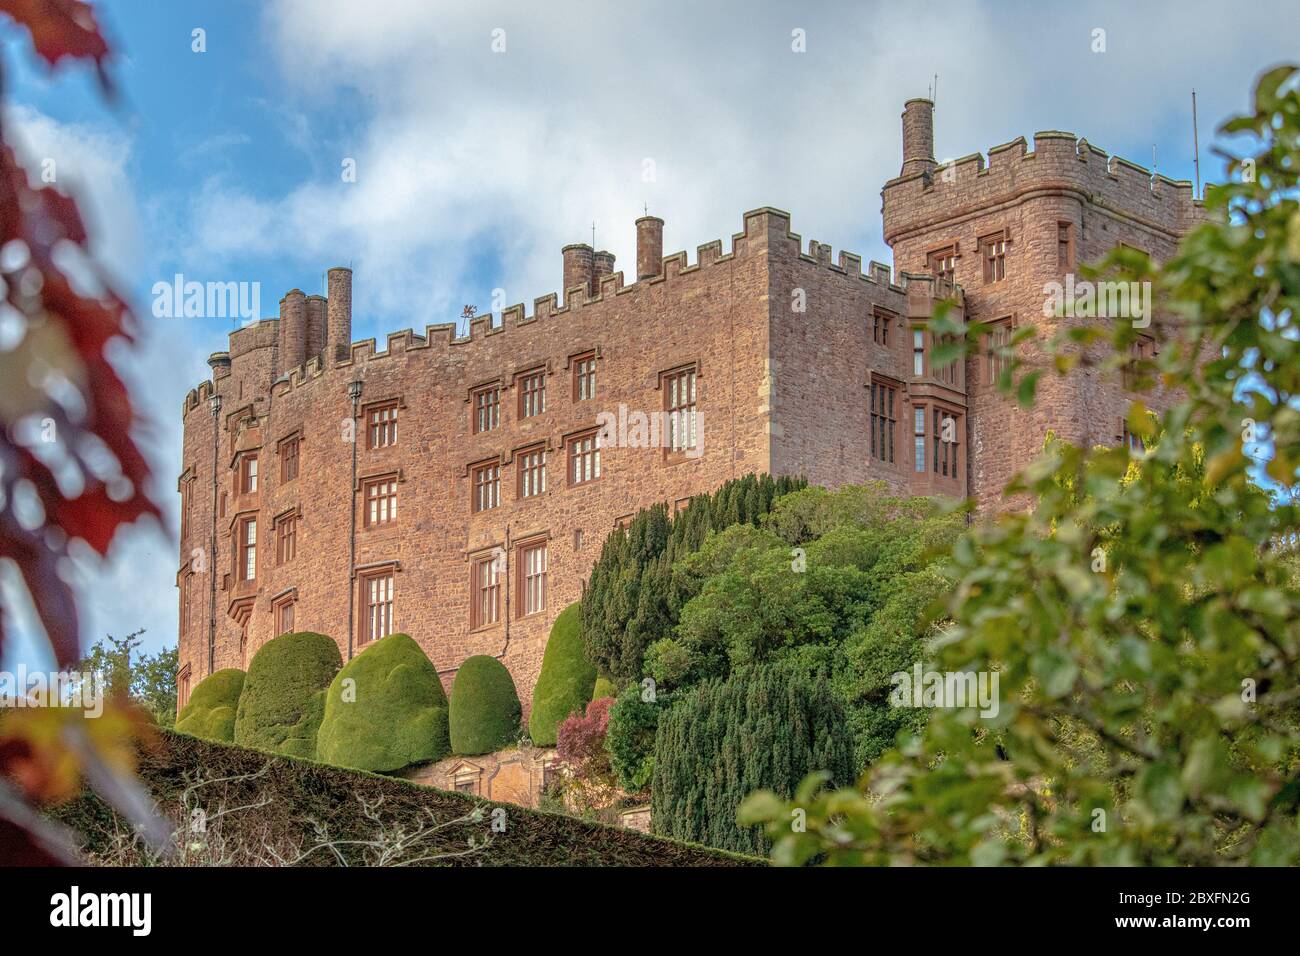 Images of beautiful Powis Castle and garden near Welshpool in mid-Wales UK Stock Photo